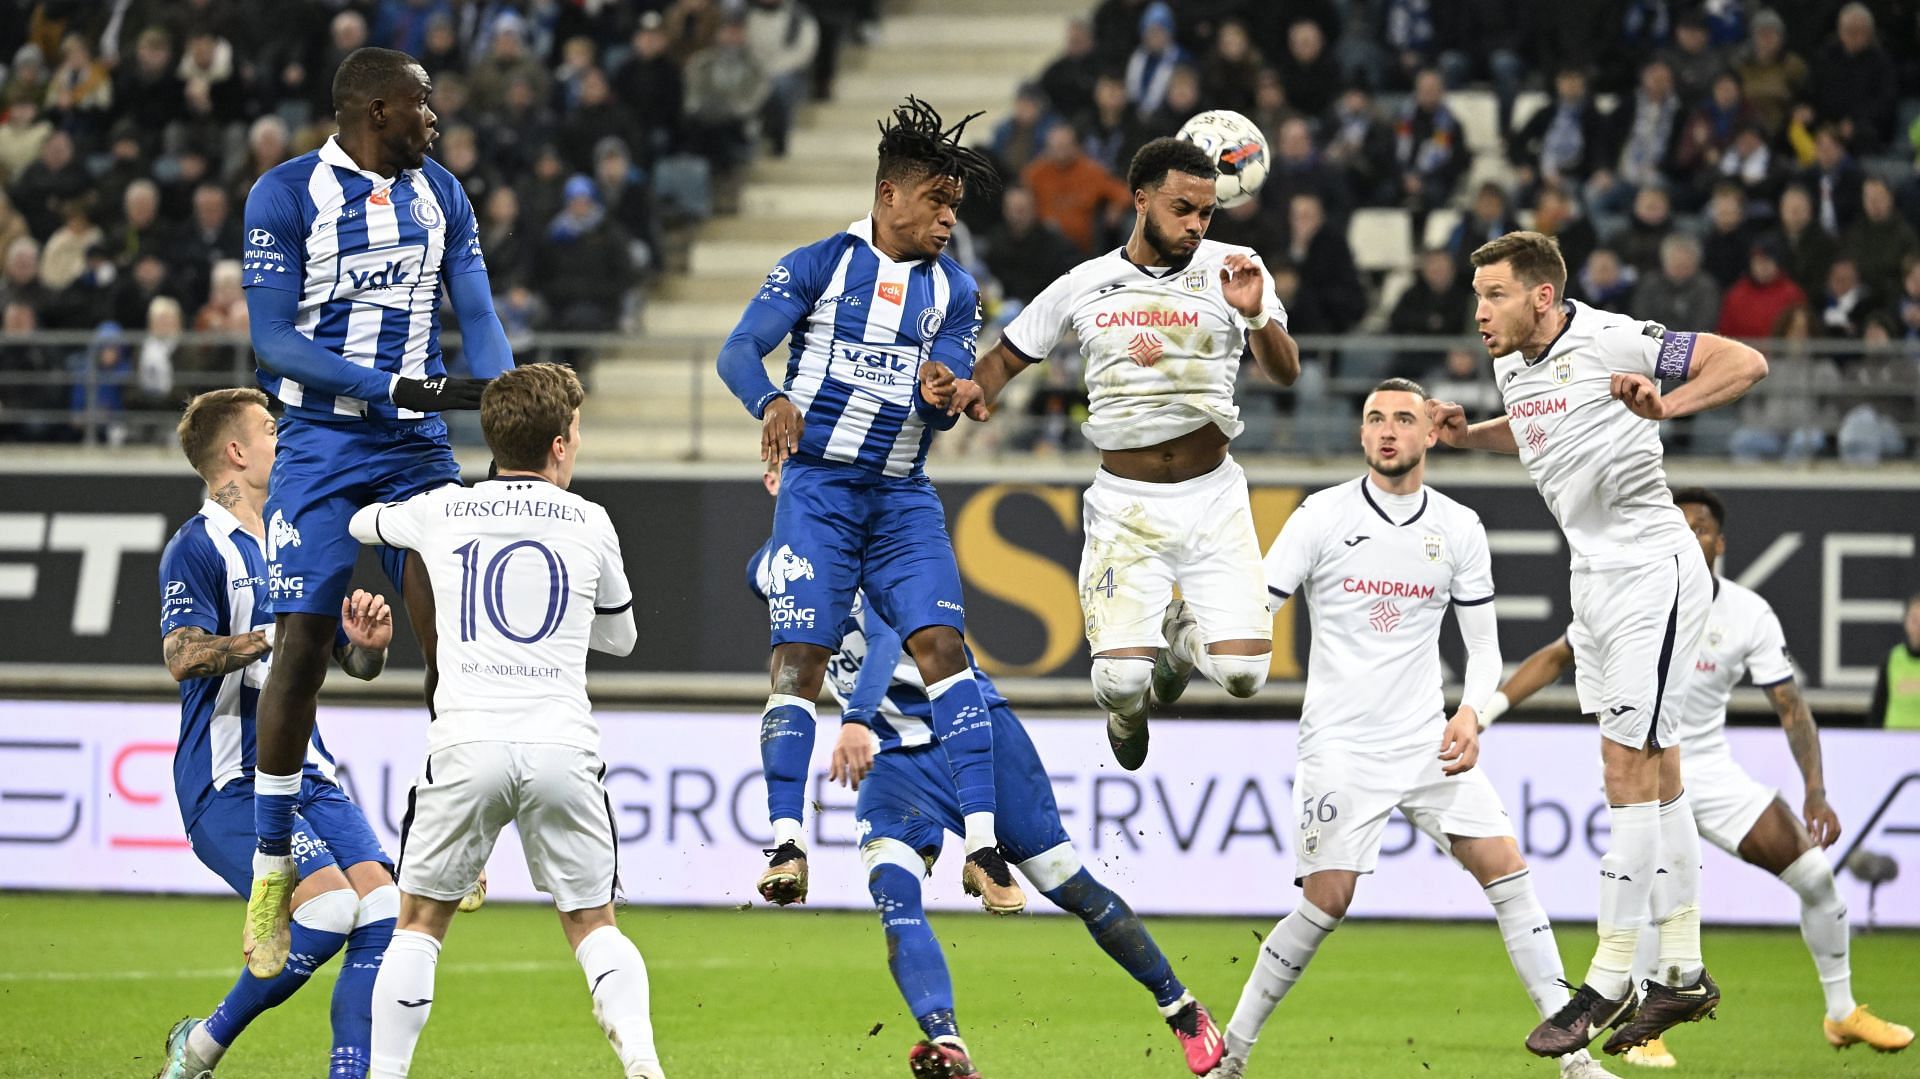 Gent and Anderlecht will lock horns in the Belgian Pro League on Sunday